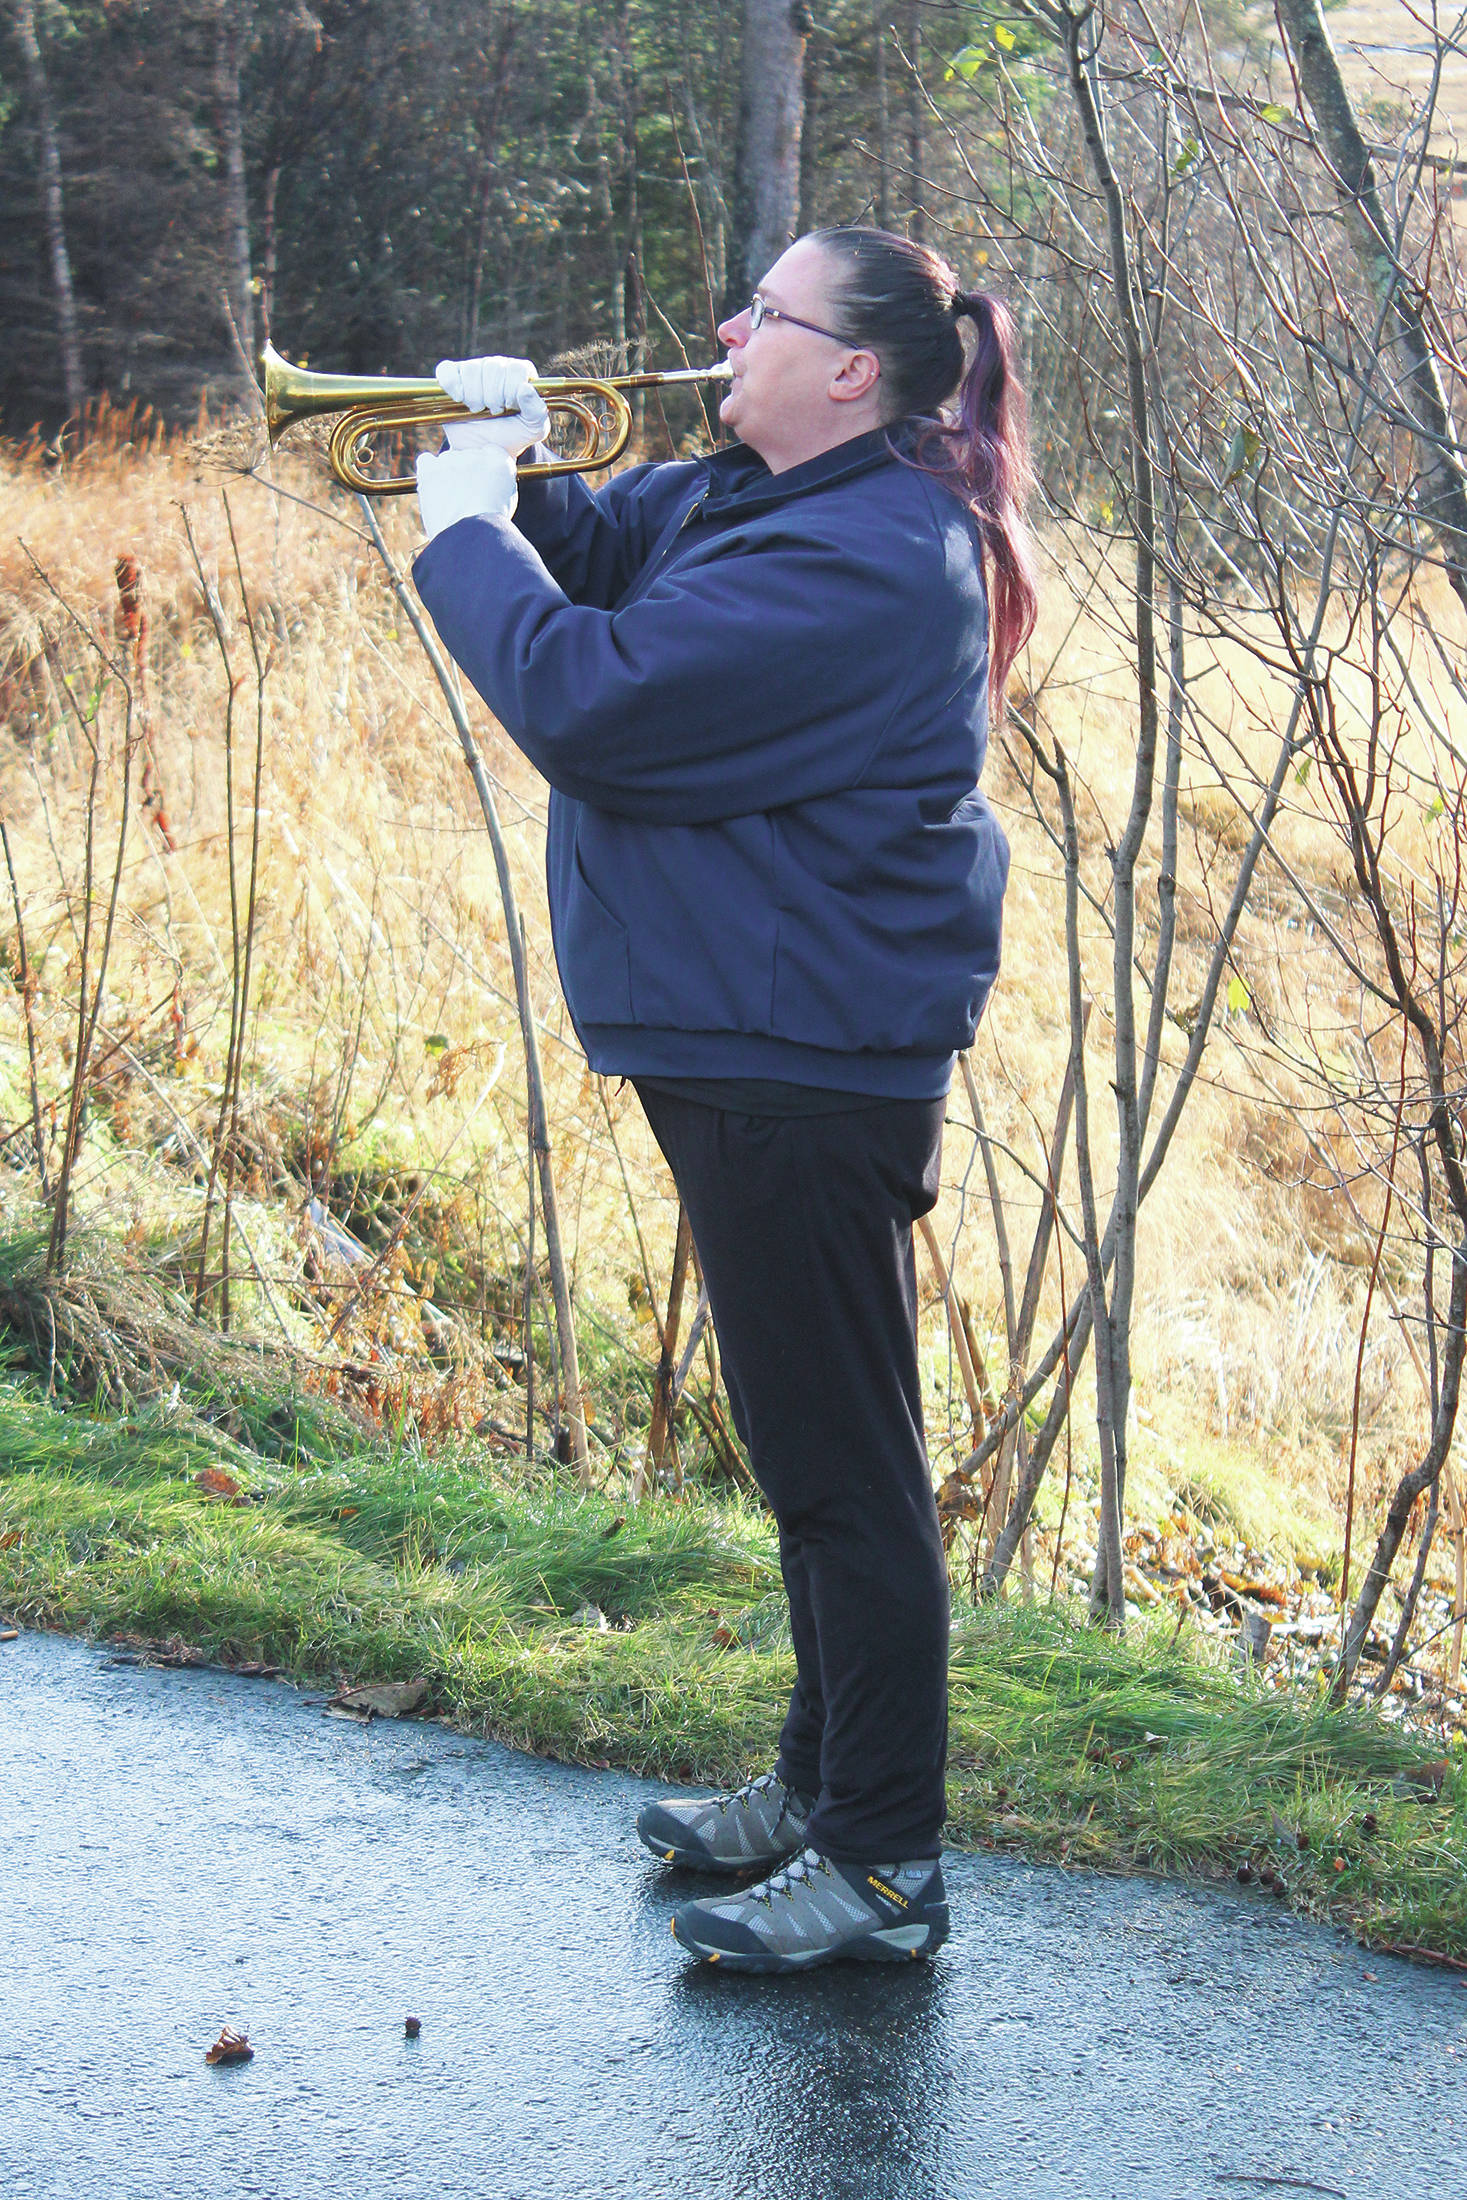 Christine Bond-Hill plays taps during this year’s Veterans Day celebration on Wednesday, Nov. 11, 2020 at the Alaska Islands & Ocean Visitor Center in Homer, Alaska. (Photo by Megan Pacer/Homer News)